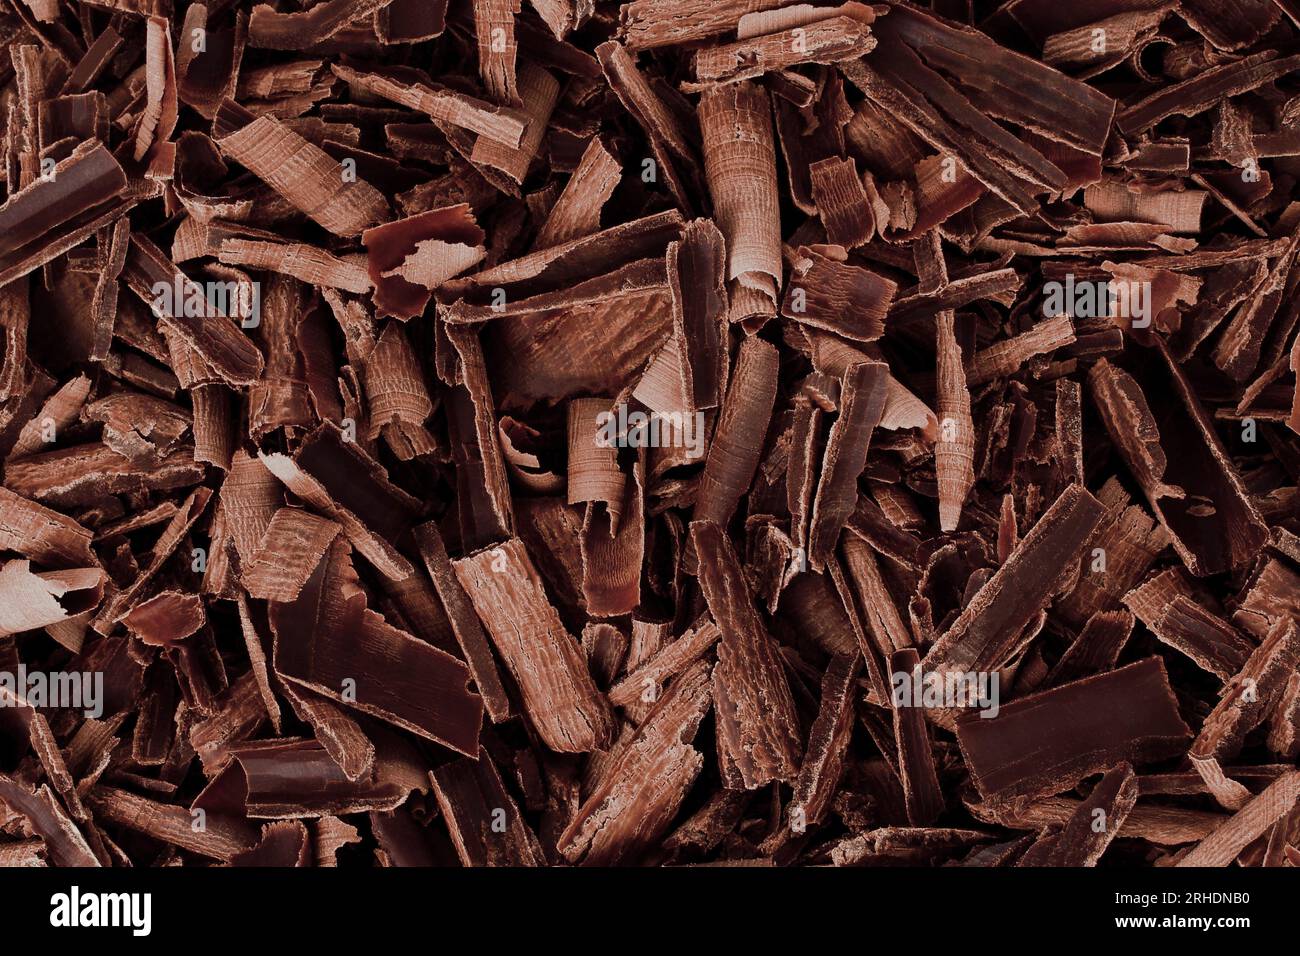 Background of Chocolate Curls close-up with texture Stock Photo